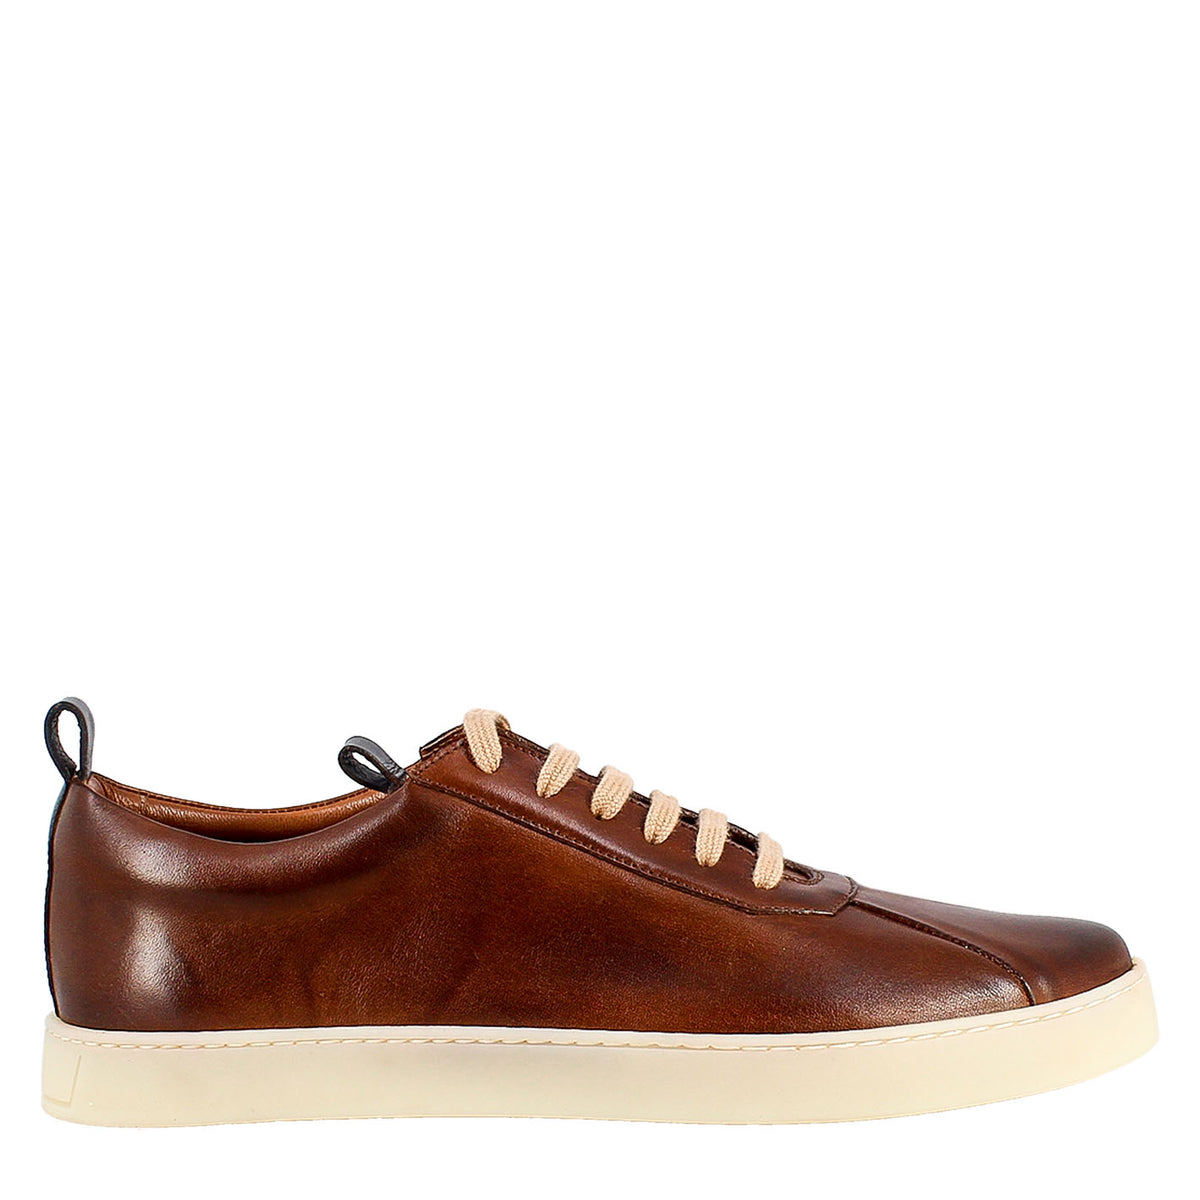 Elegant men's brown and blue sneaker in smooth leather